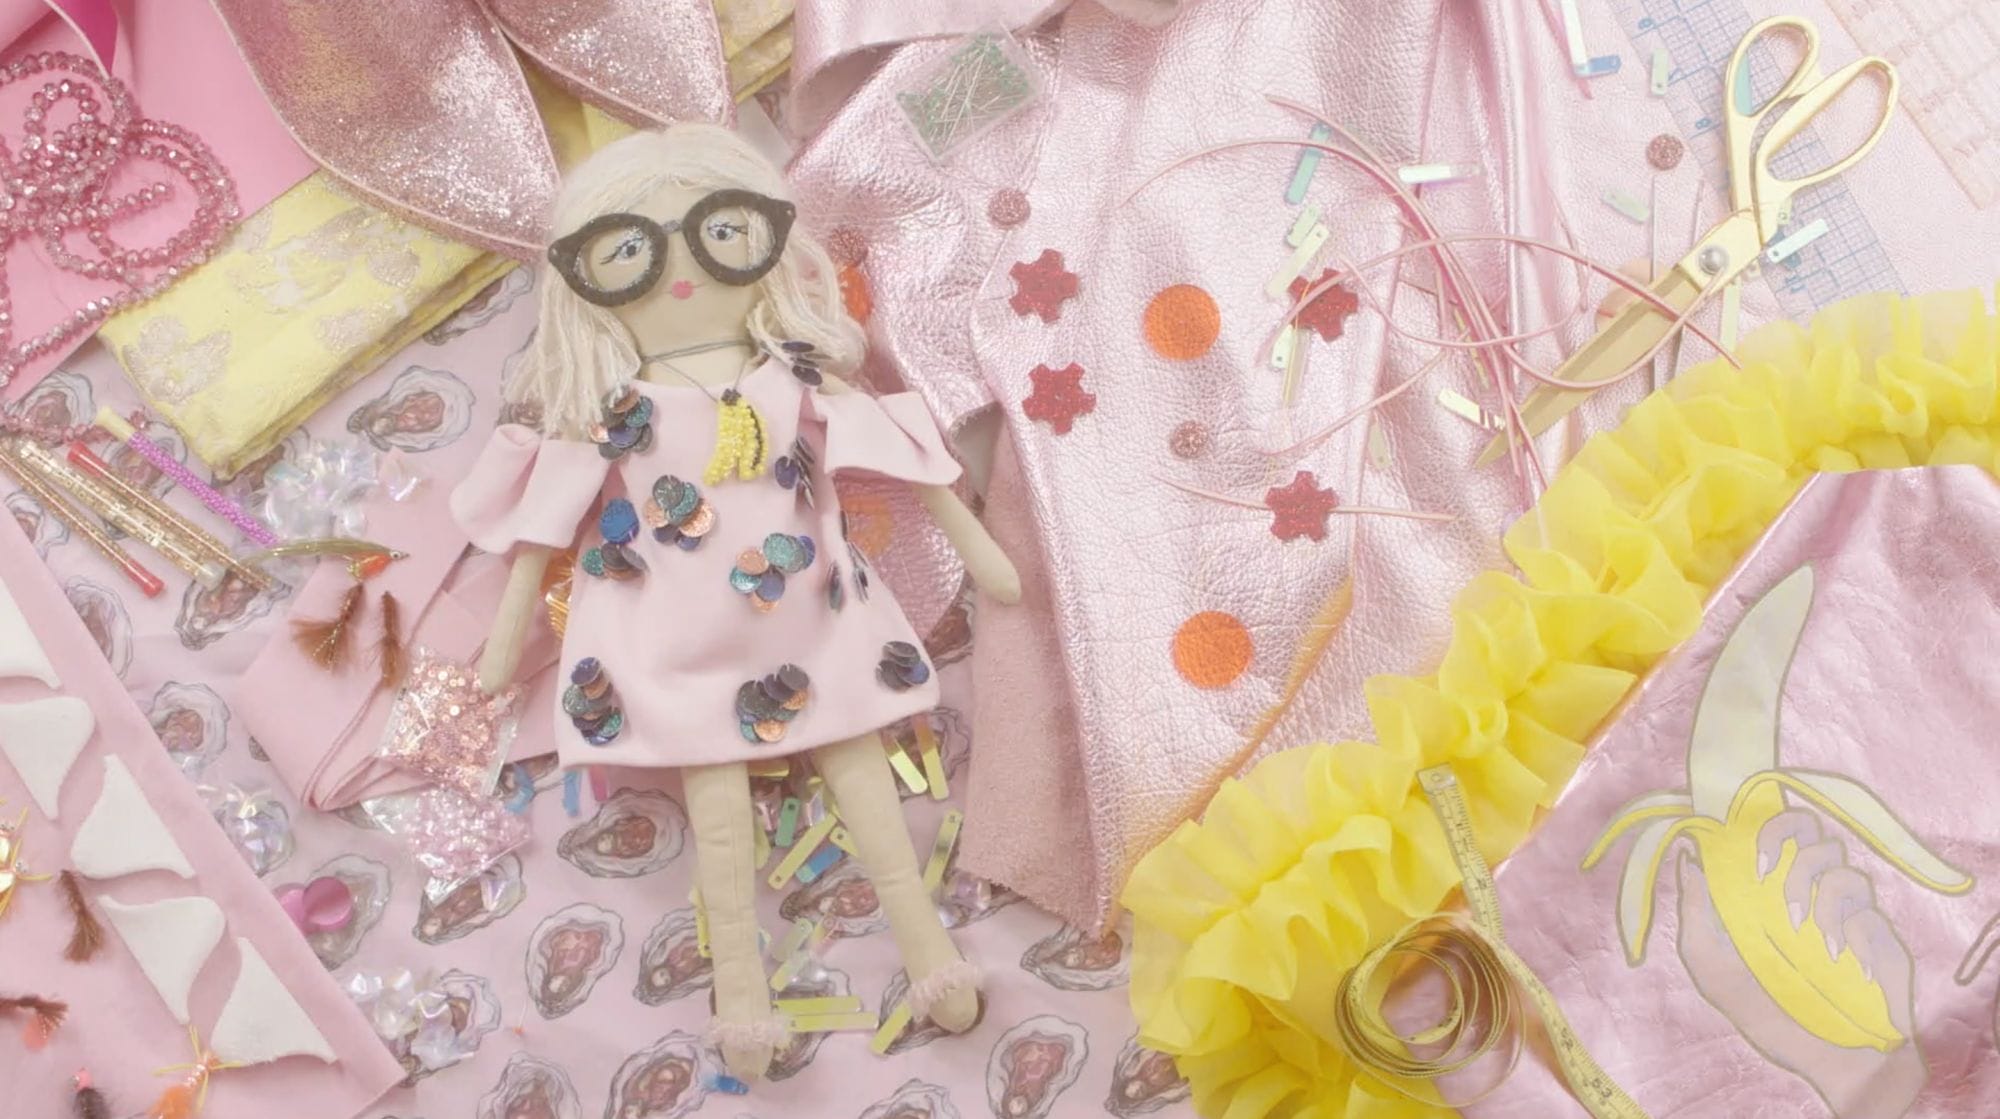 Video still of a blond handmade doll laying on pink fabric